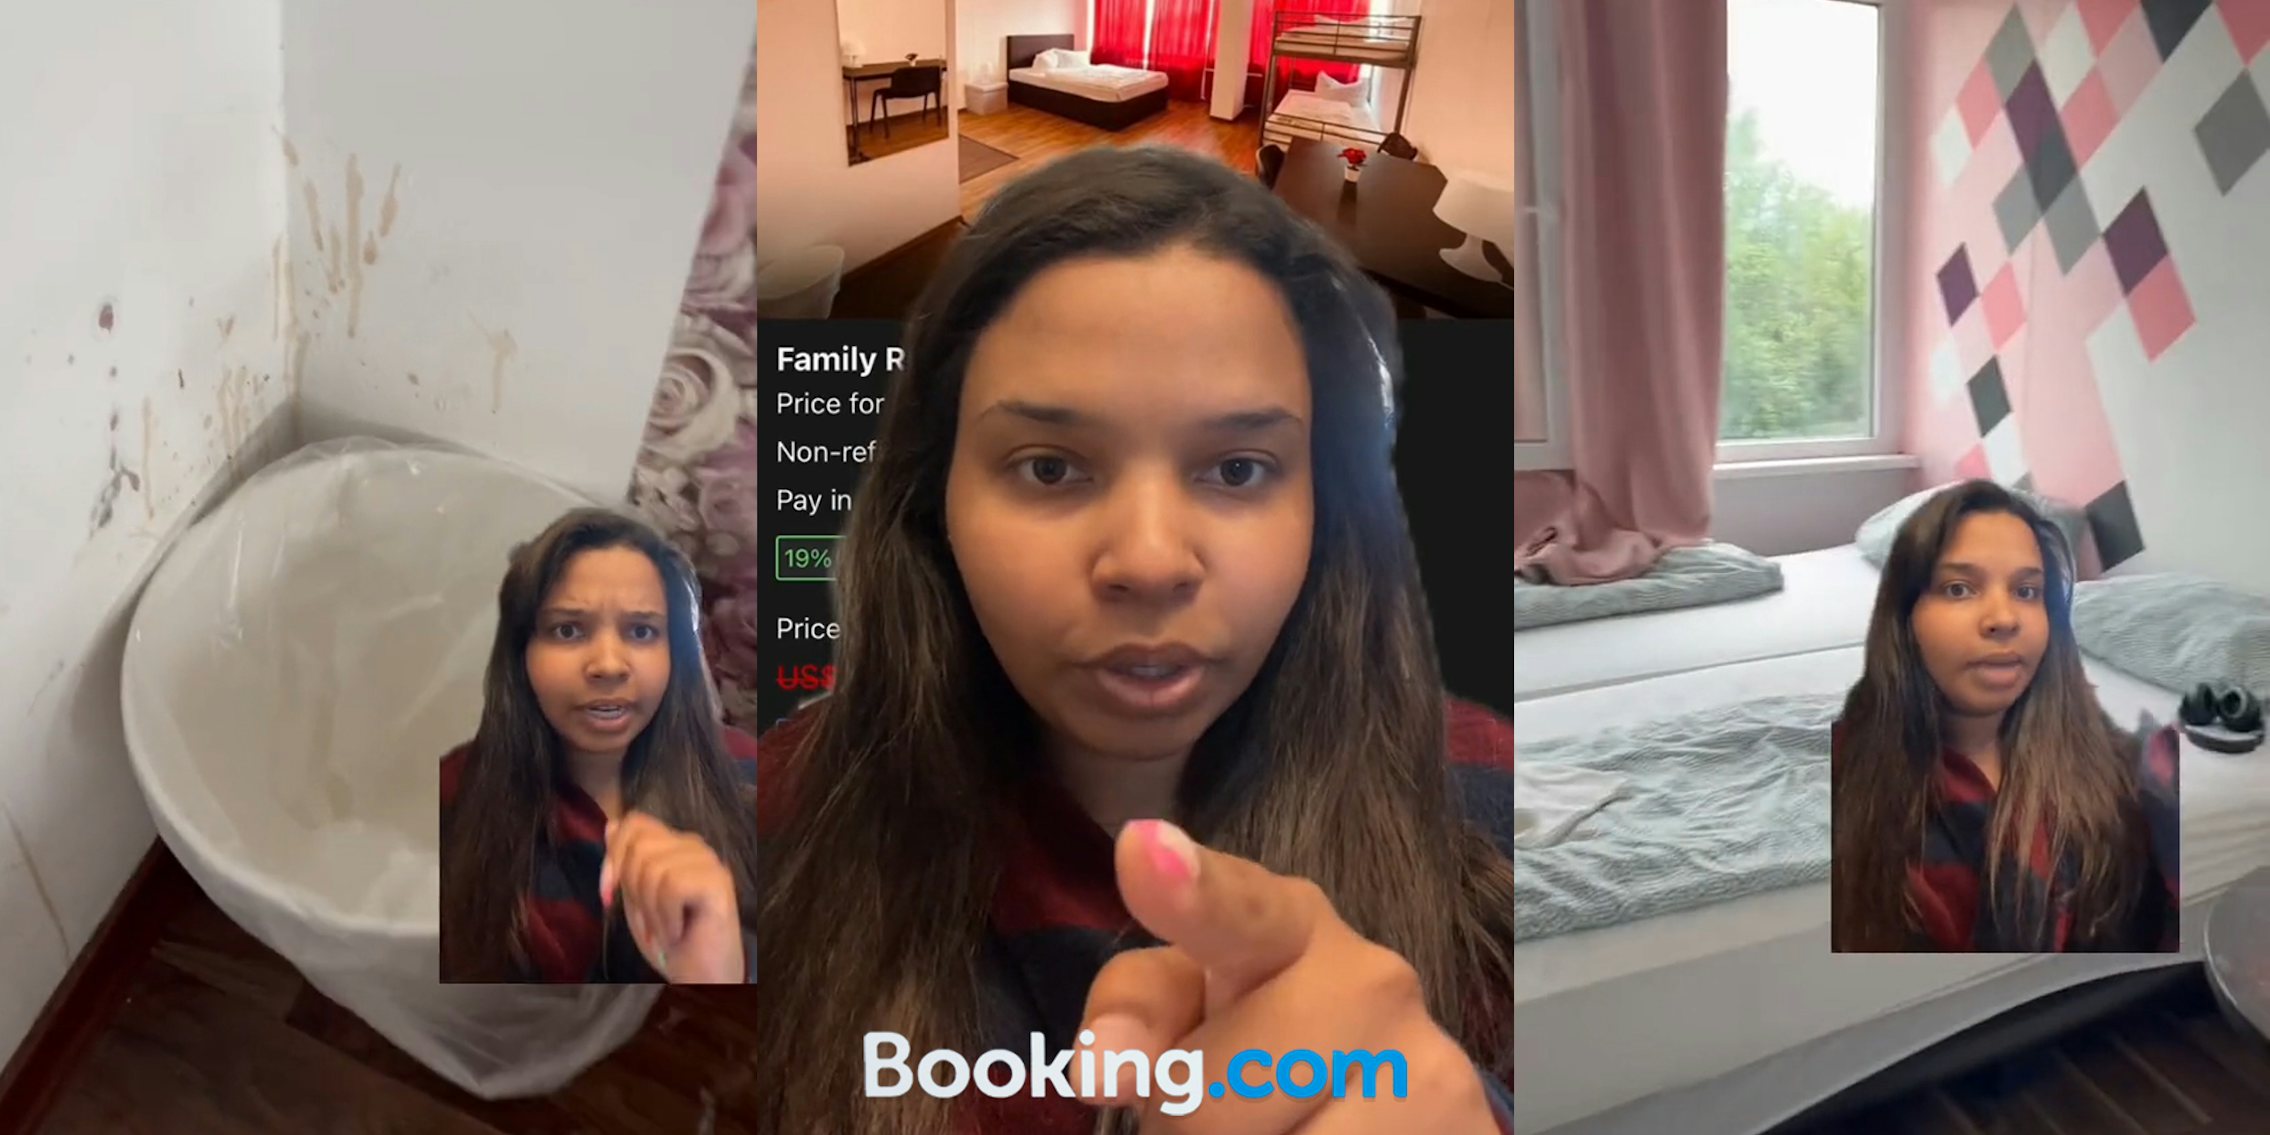 hotel guest greenscreen TikTok over image of room's messy trash can area with stains on wall (l) hotel guest greenscreen TikTok over image of Booking.com image of hotel room with Booking.com logo at bottom (c) hotel guest greenscreen TikTok over image of hotel room that looks different from Booking.com images (r)